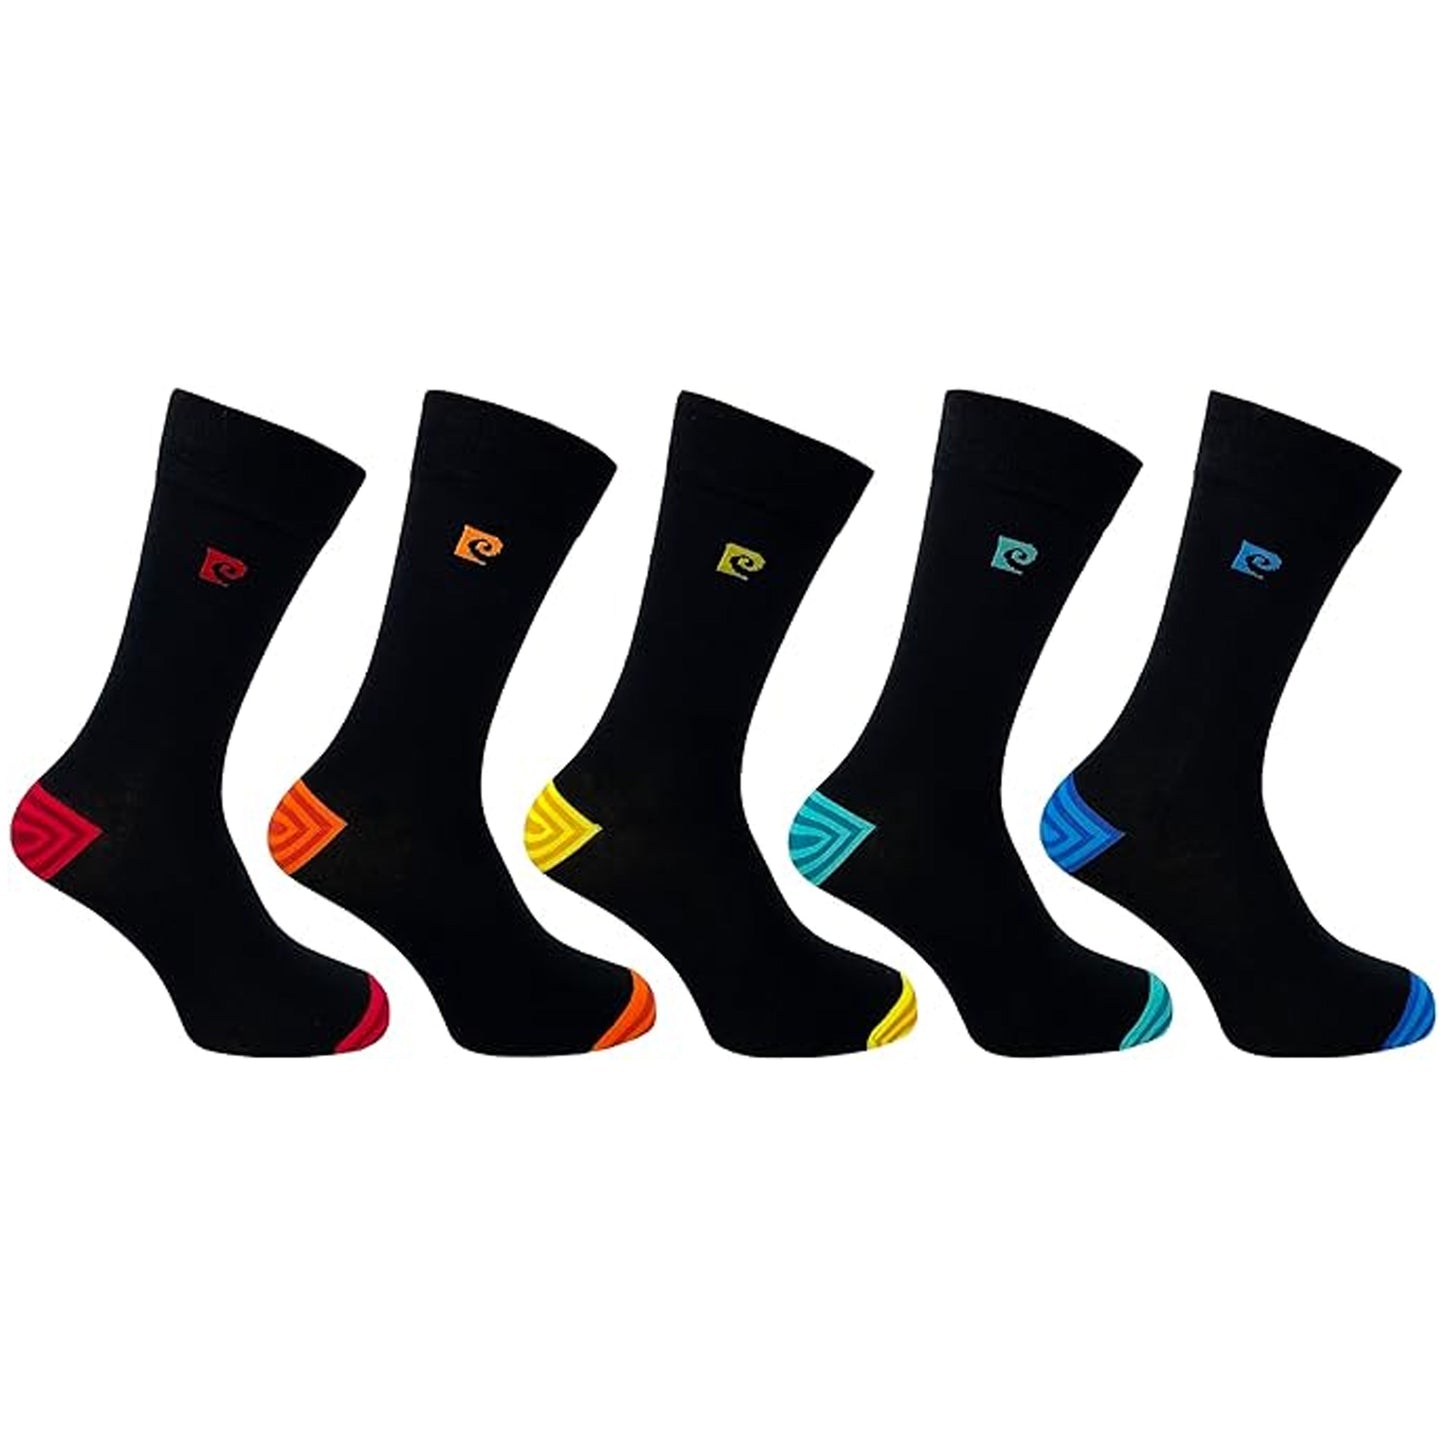 Pierre Cardin 5 Pack Bamboo Socks - Bright Footbed